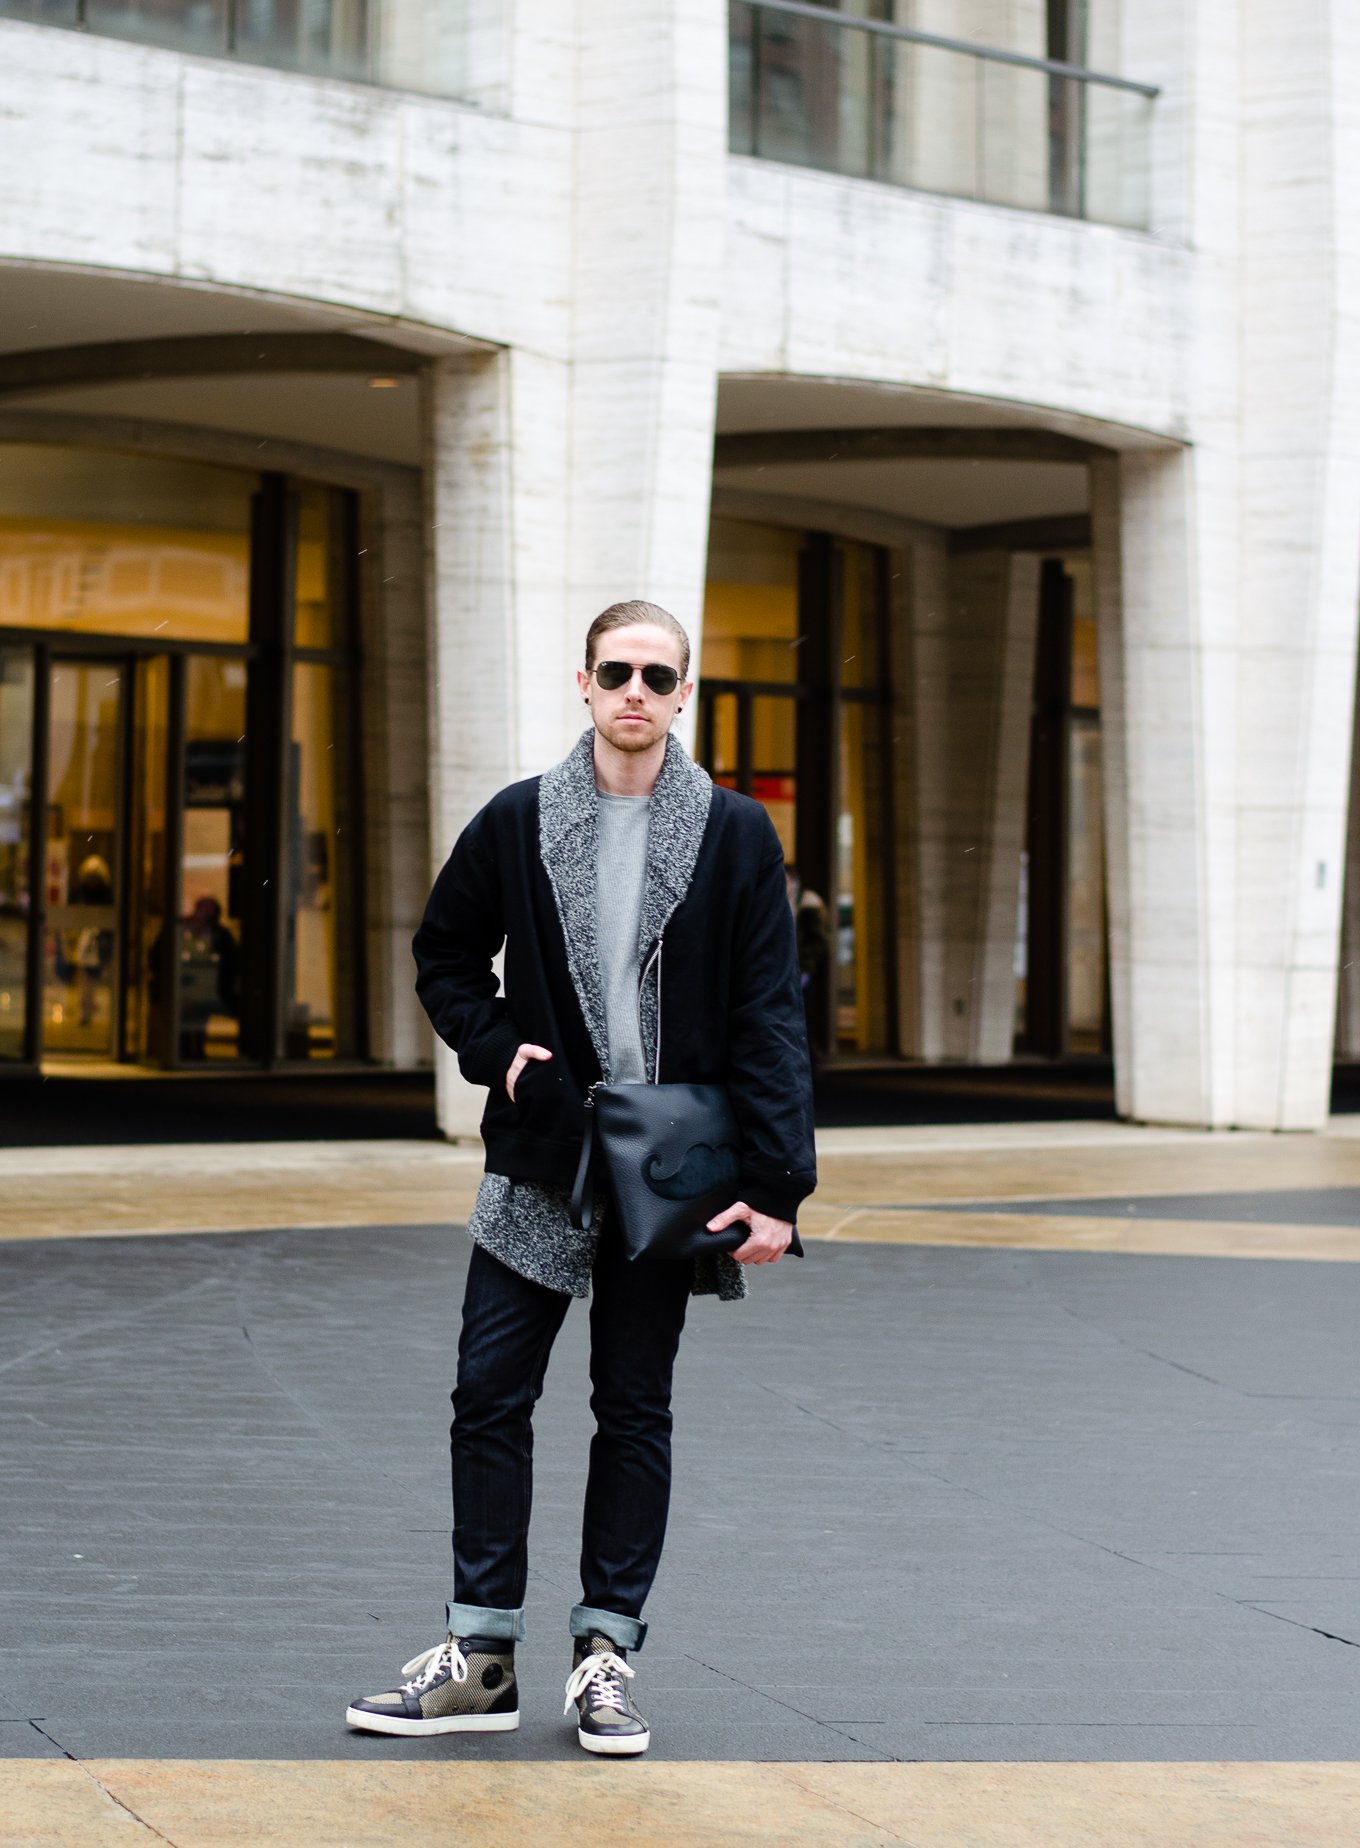 The Kentucky Gent, a men's fashion and lifestyle blogger, spends his first day of NYFW at Lincoln Center in Christian Louboutin sneakers and bag.The Kentucky Gent, a men's fashion and lifestyle blogger, spends his first day of NYFW at Lincoln Center in Christian Louboutin sneakers and bag.